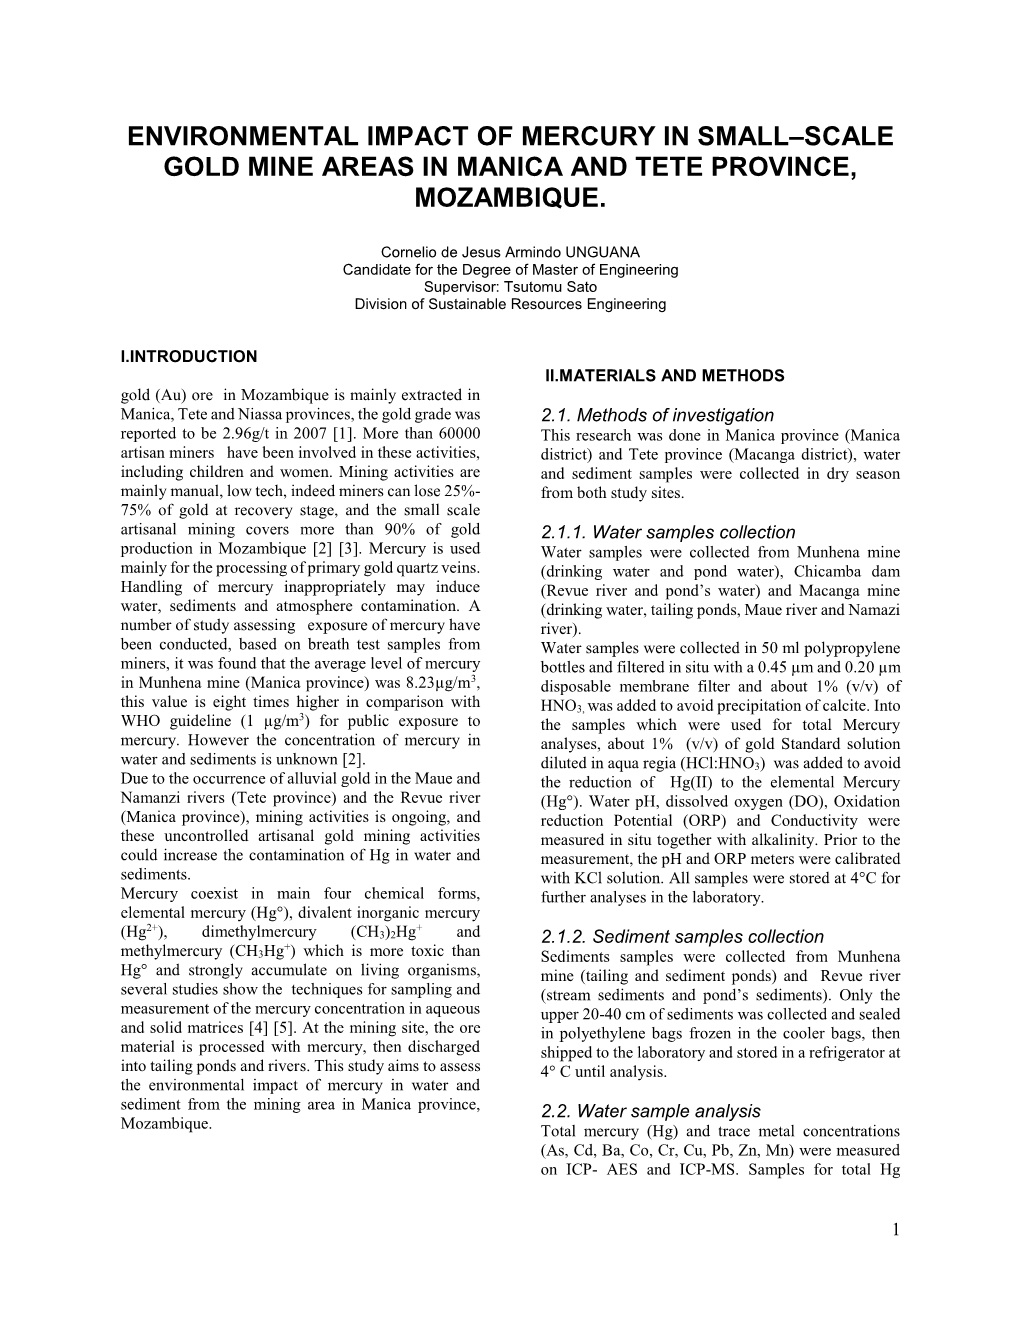 Environmental Impact of Mercury in Small–Scale Gold Mine Areas in Manica and Tete Province, Mozambique